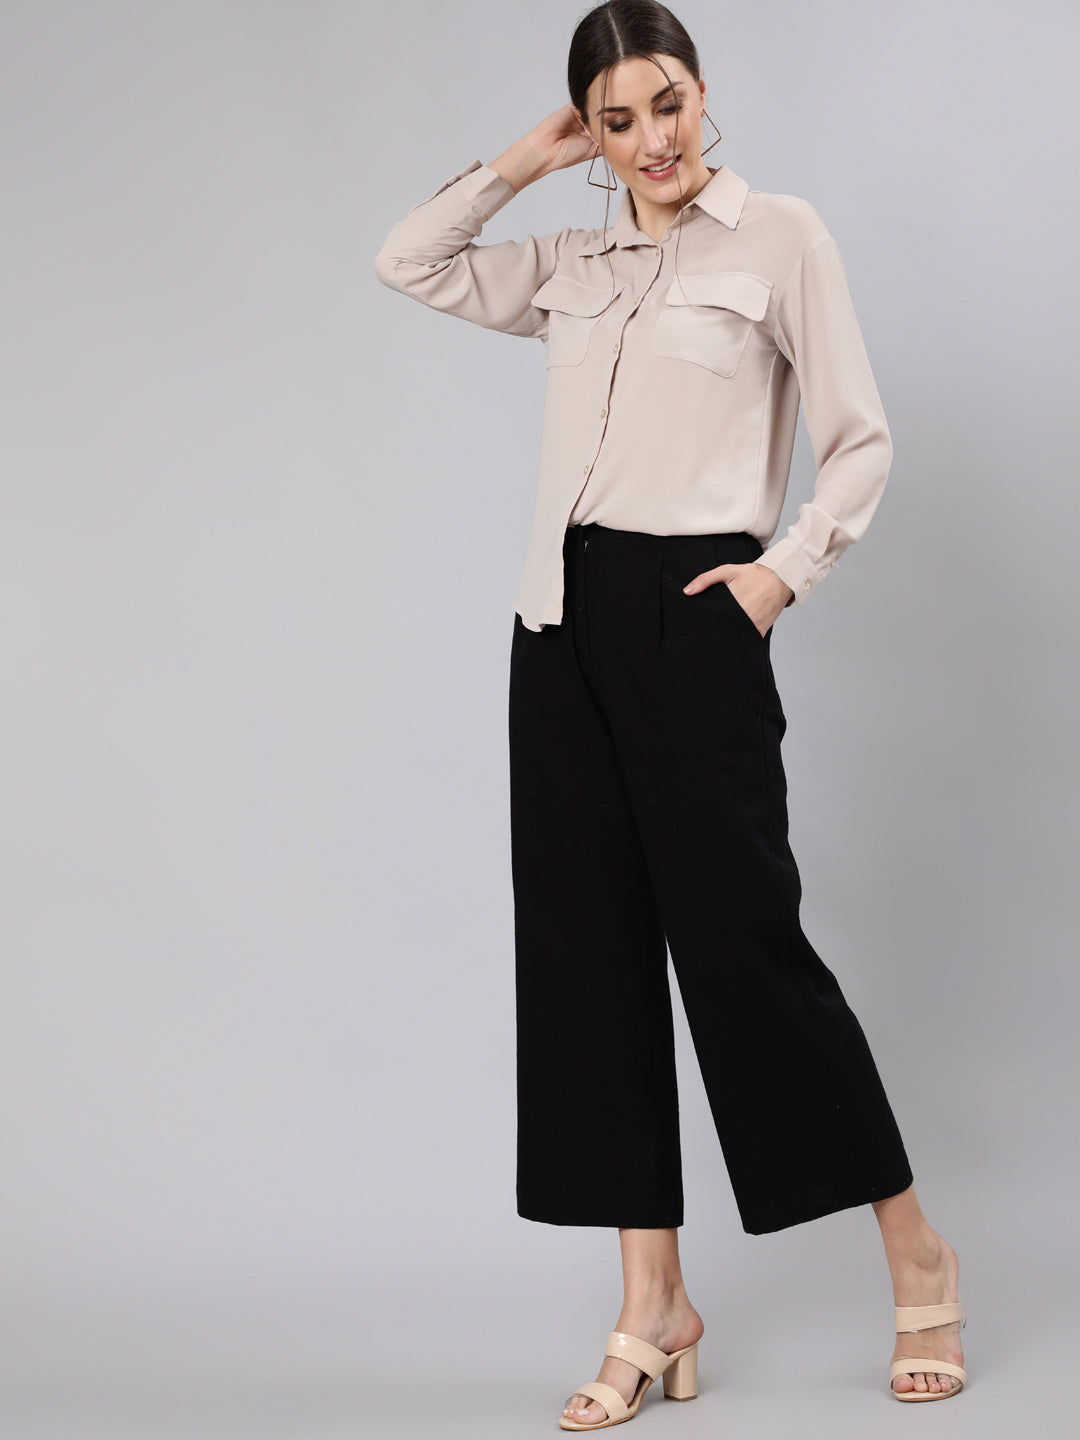 SAVE ₹1360 on Mast & Harbour Women Parallel Trousers | Best Offer in India